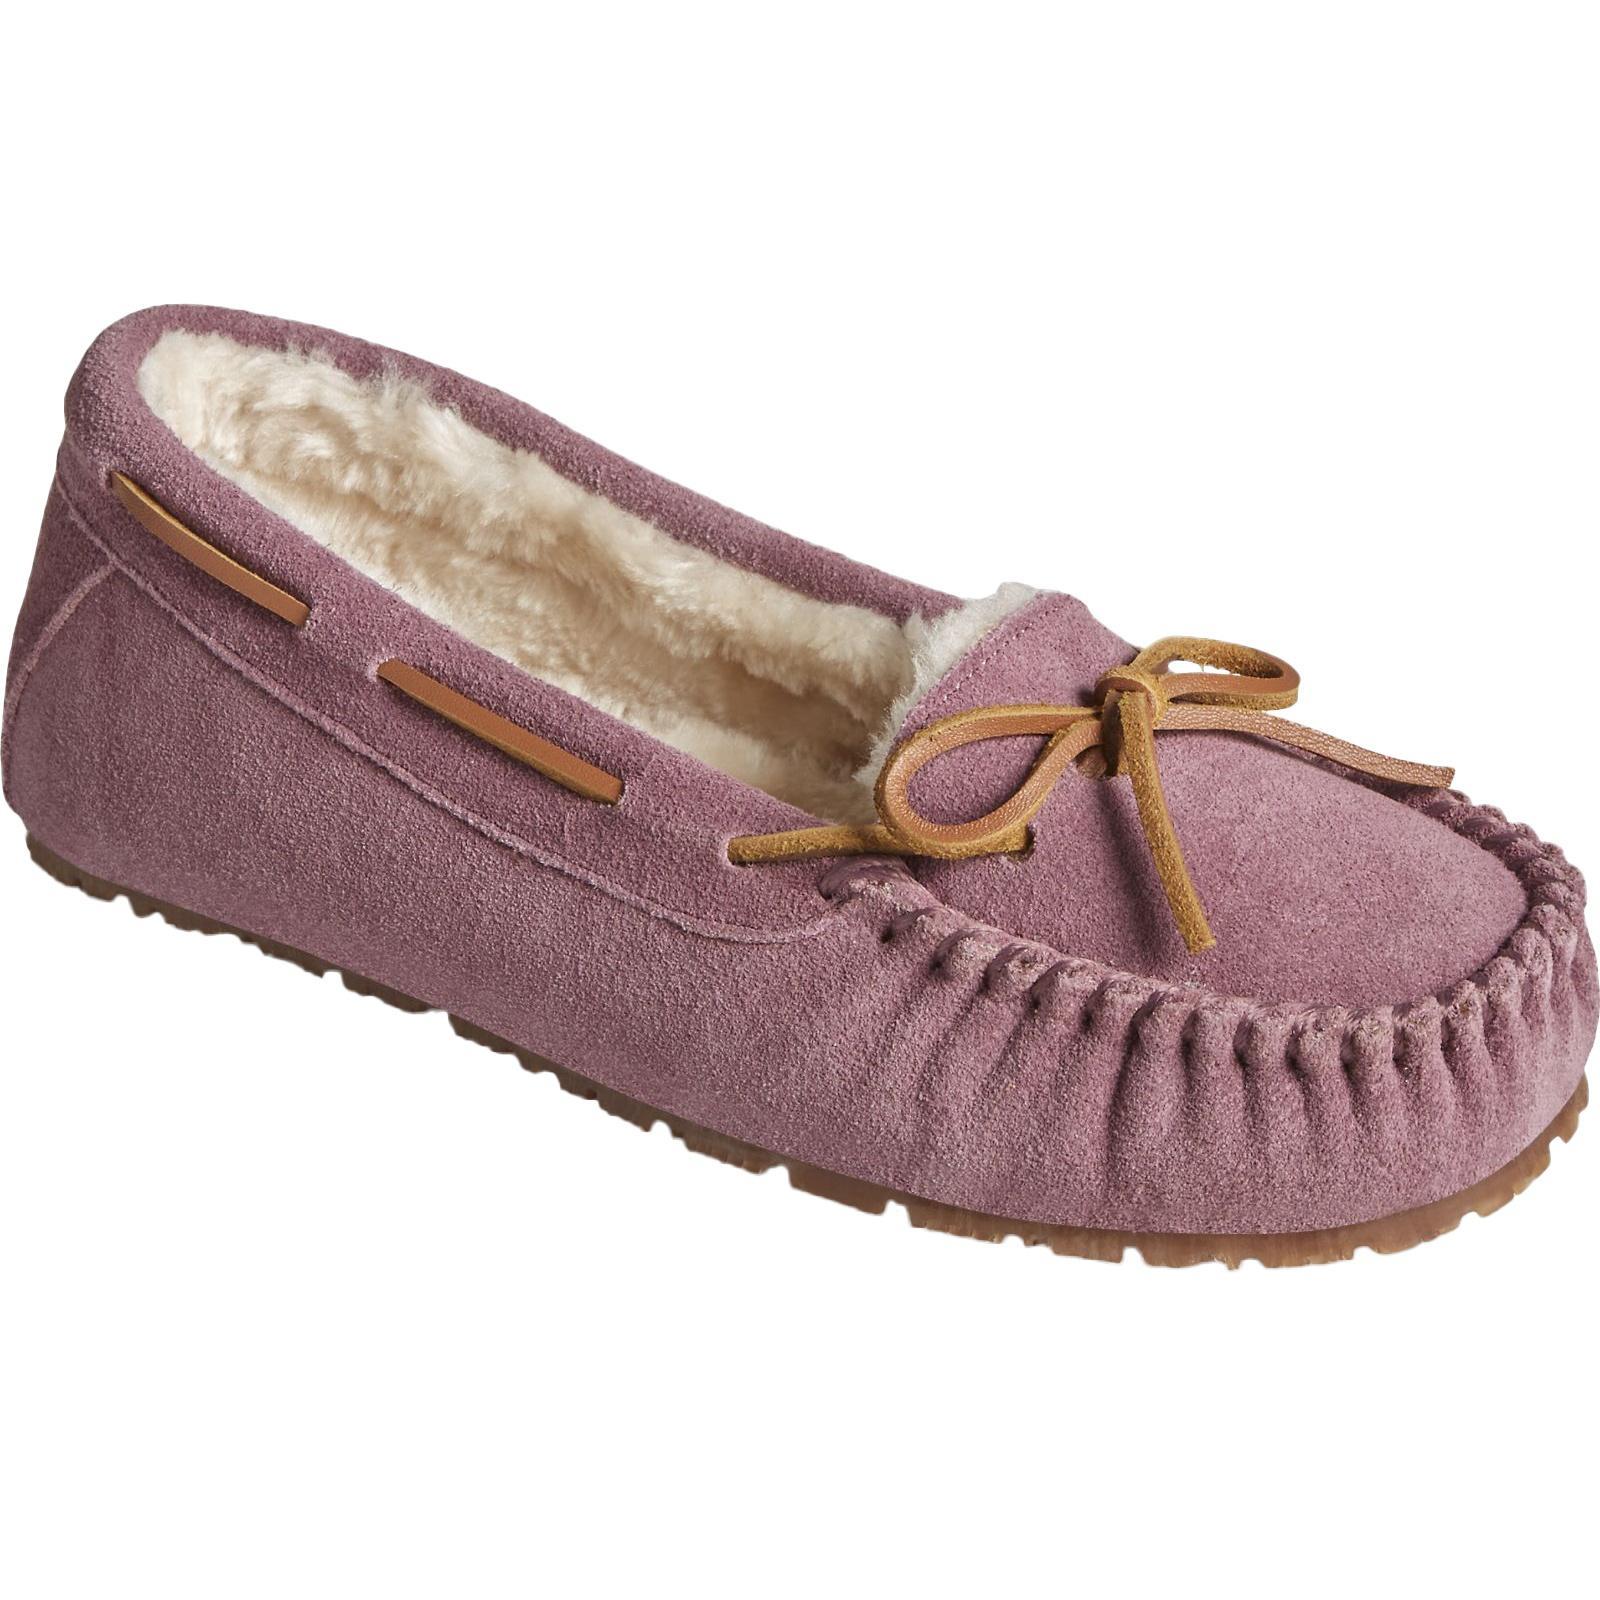 Sperry Womens/Ladies Reina Suede Slippers (Mauve) (6 UK)